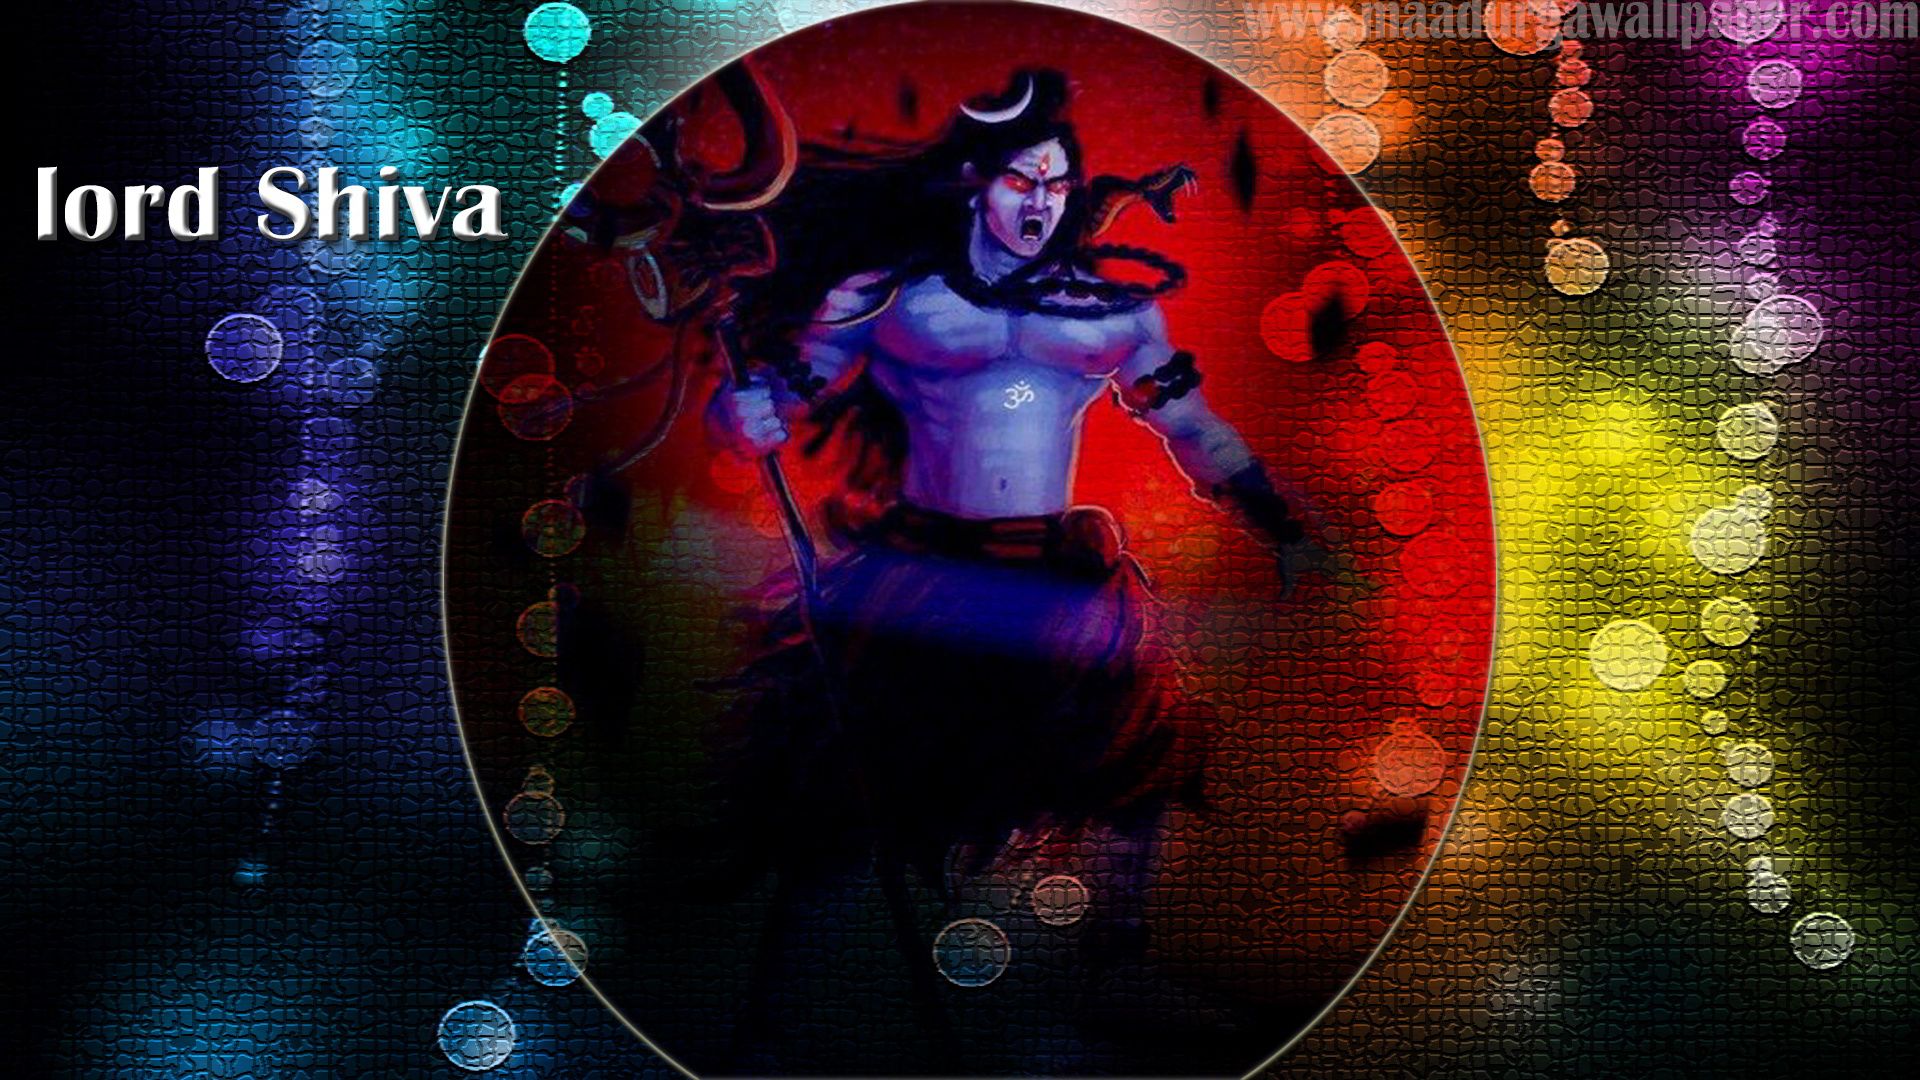 Lord Shiva Angry wallpaper depicted in fierce form